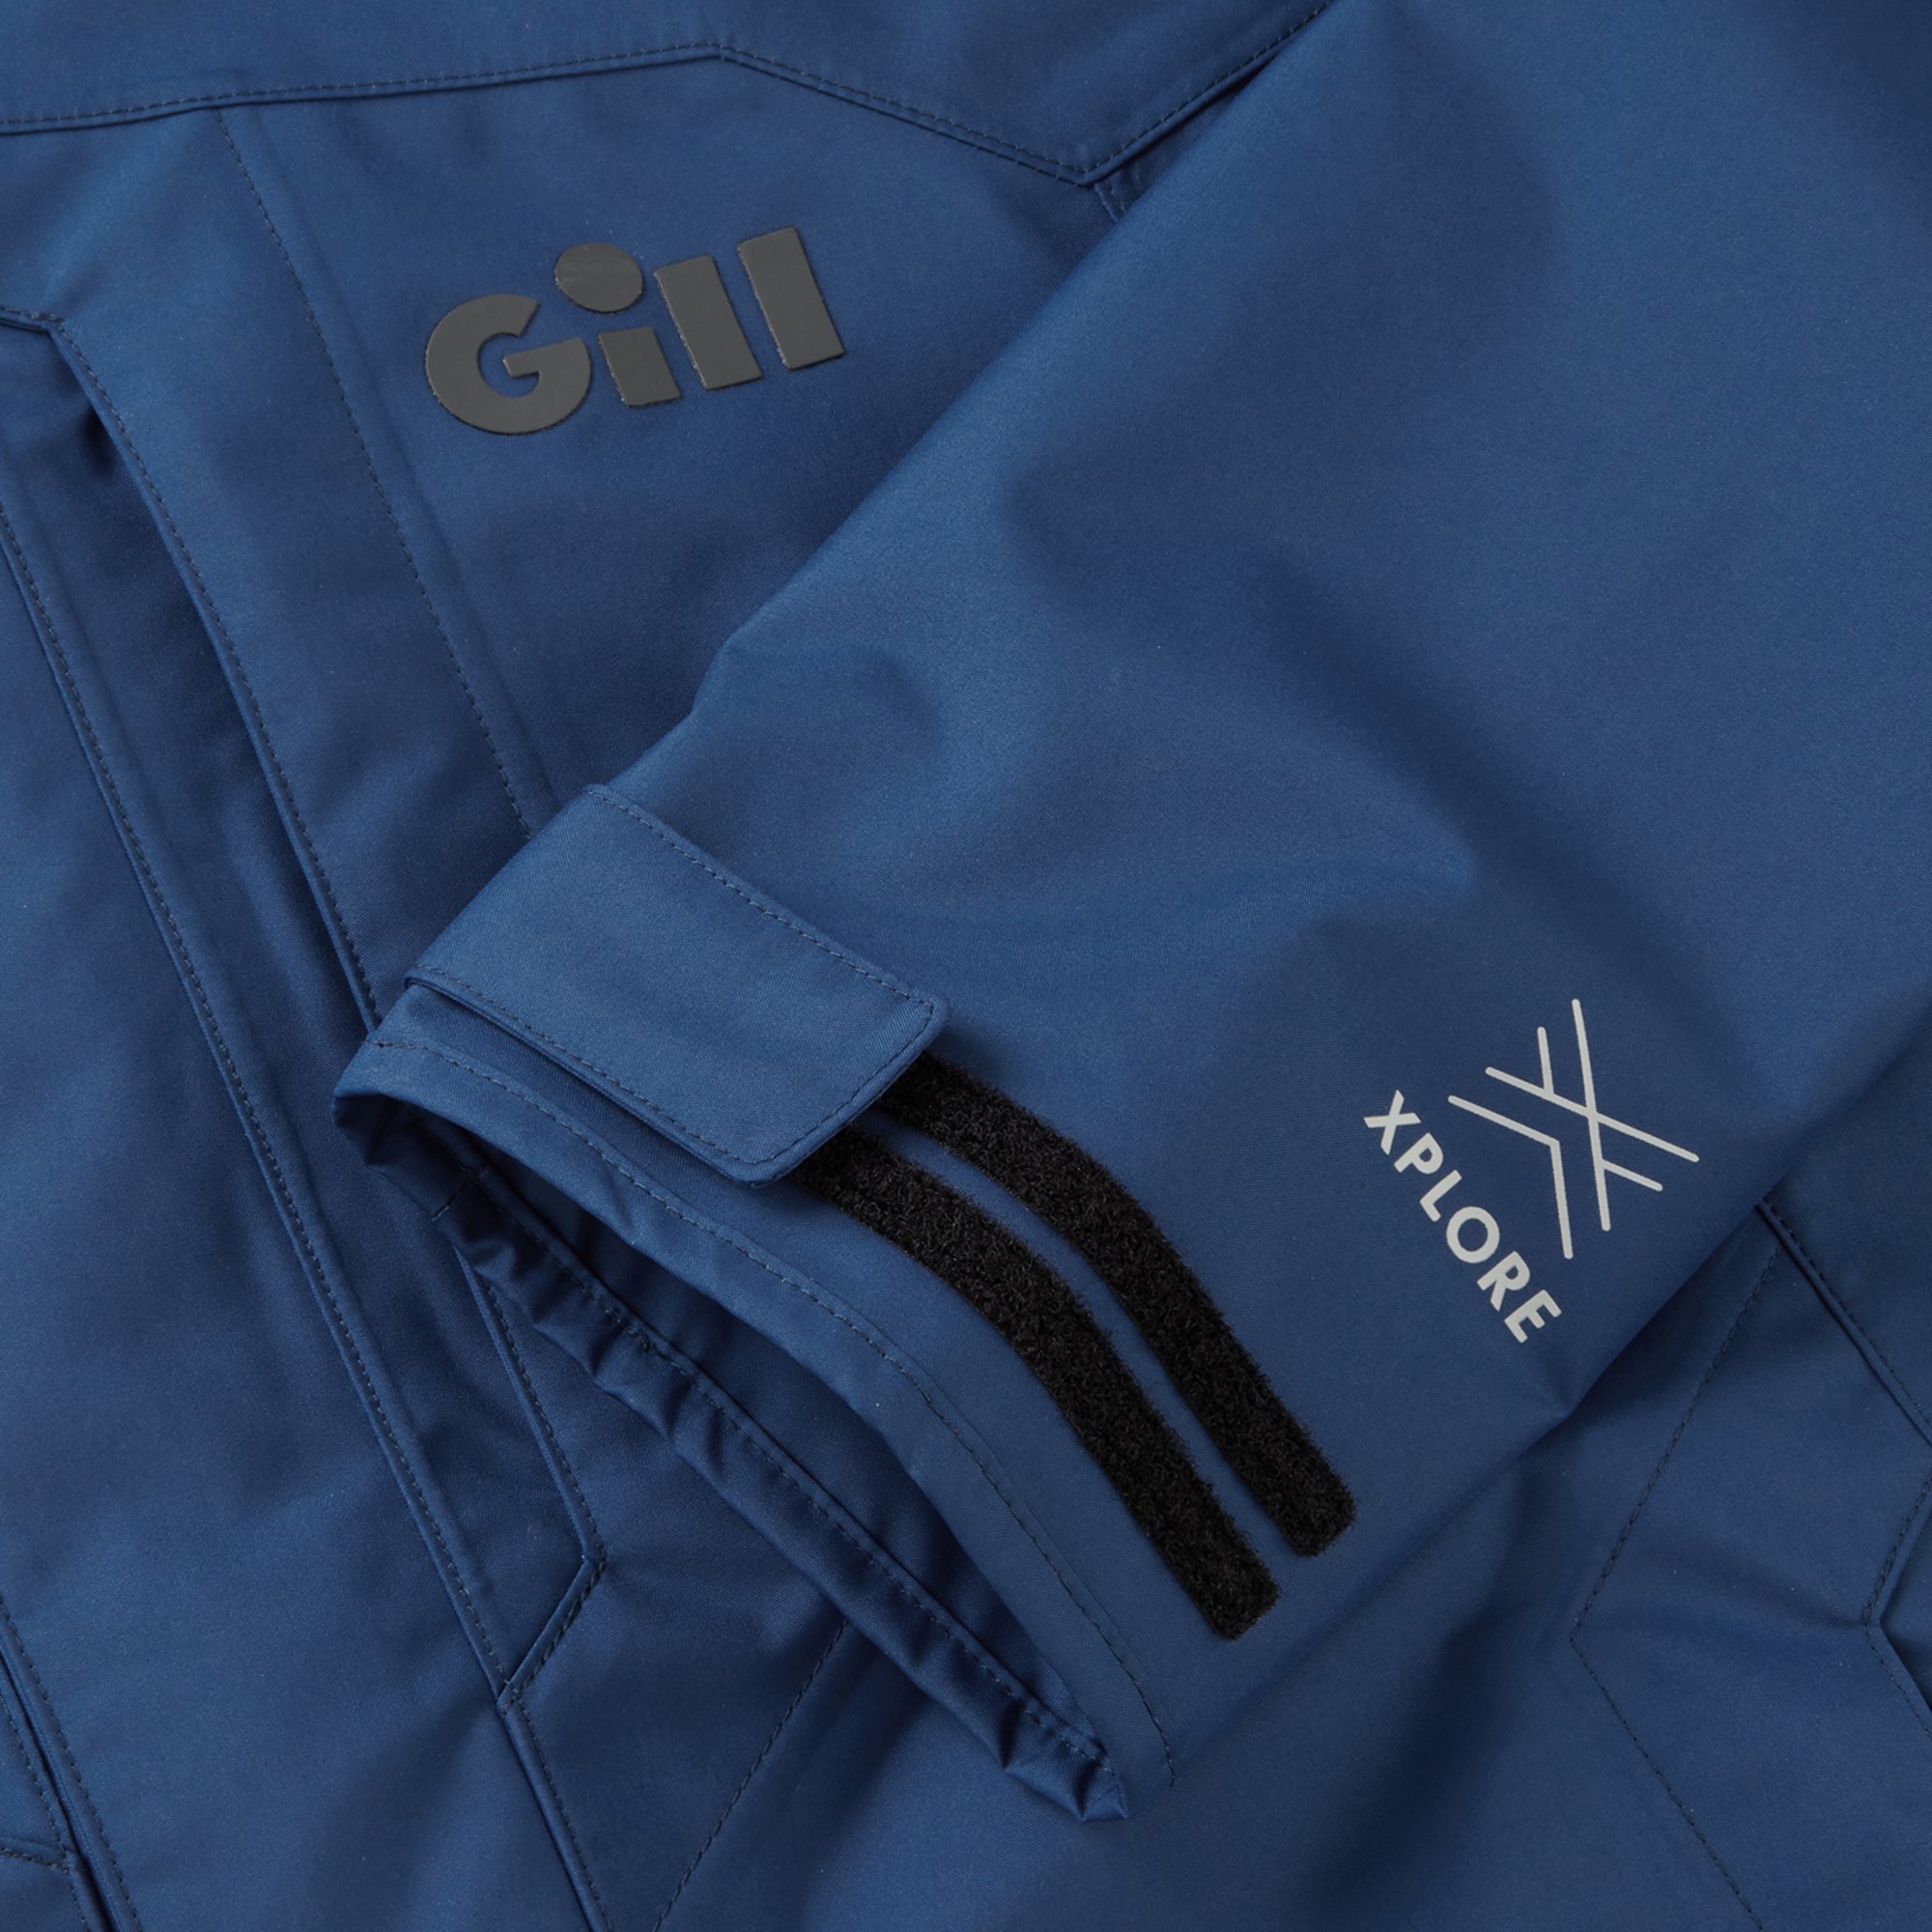 FG301J Aspect Jacket: Gill - Official Technical Apparel Store US Fishing Fishing